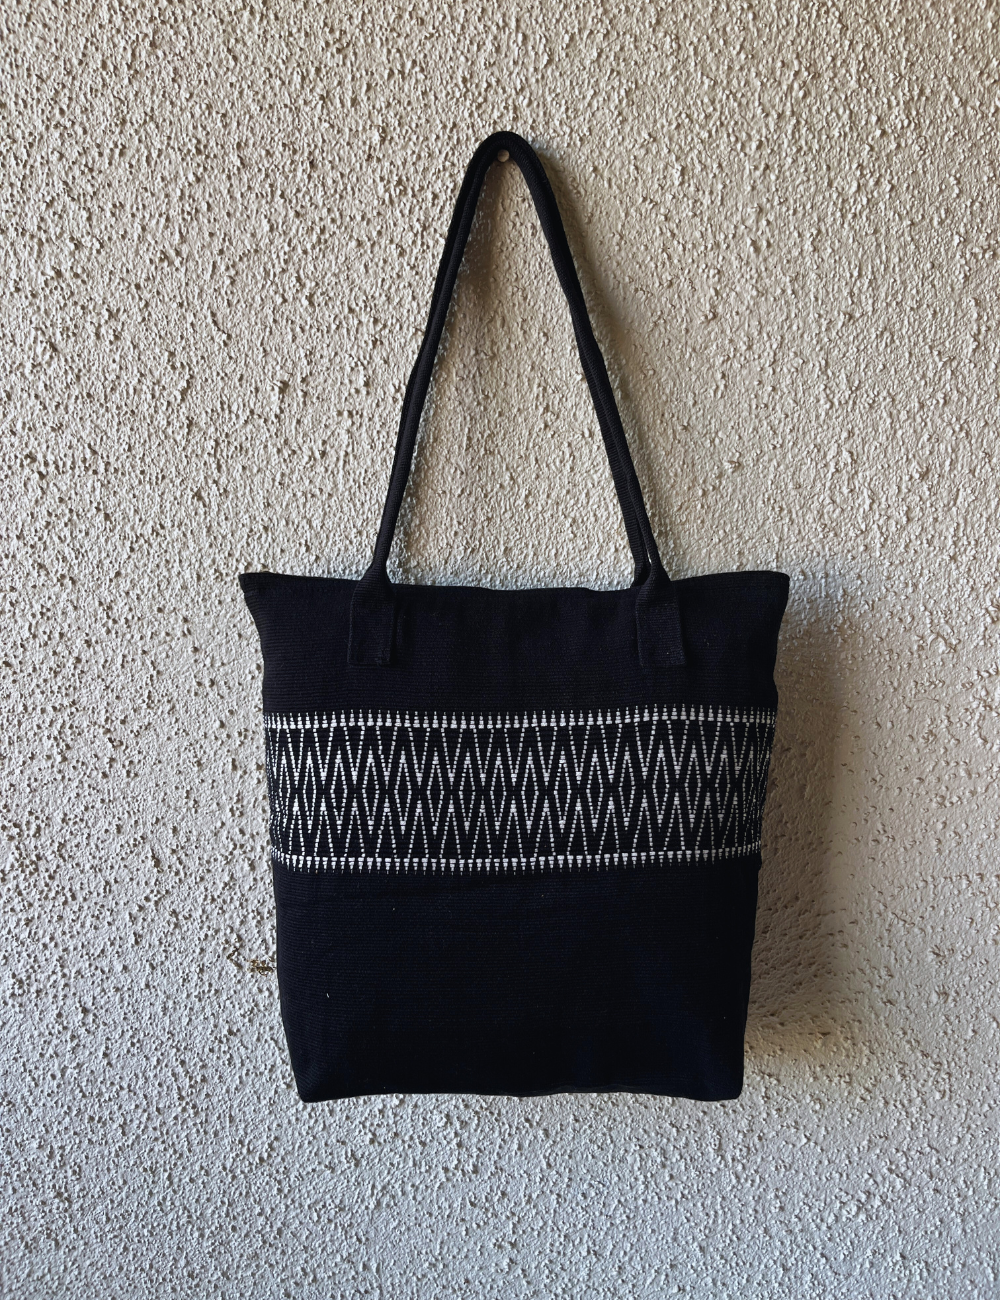 Chizami Weaves - Handwoven Tote